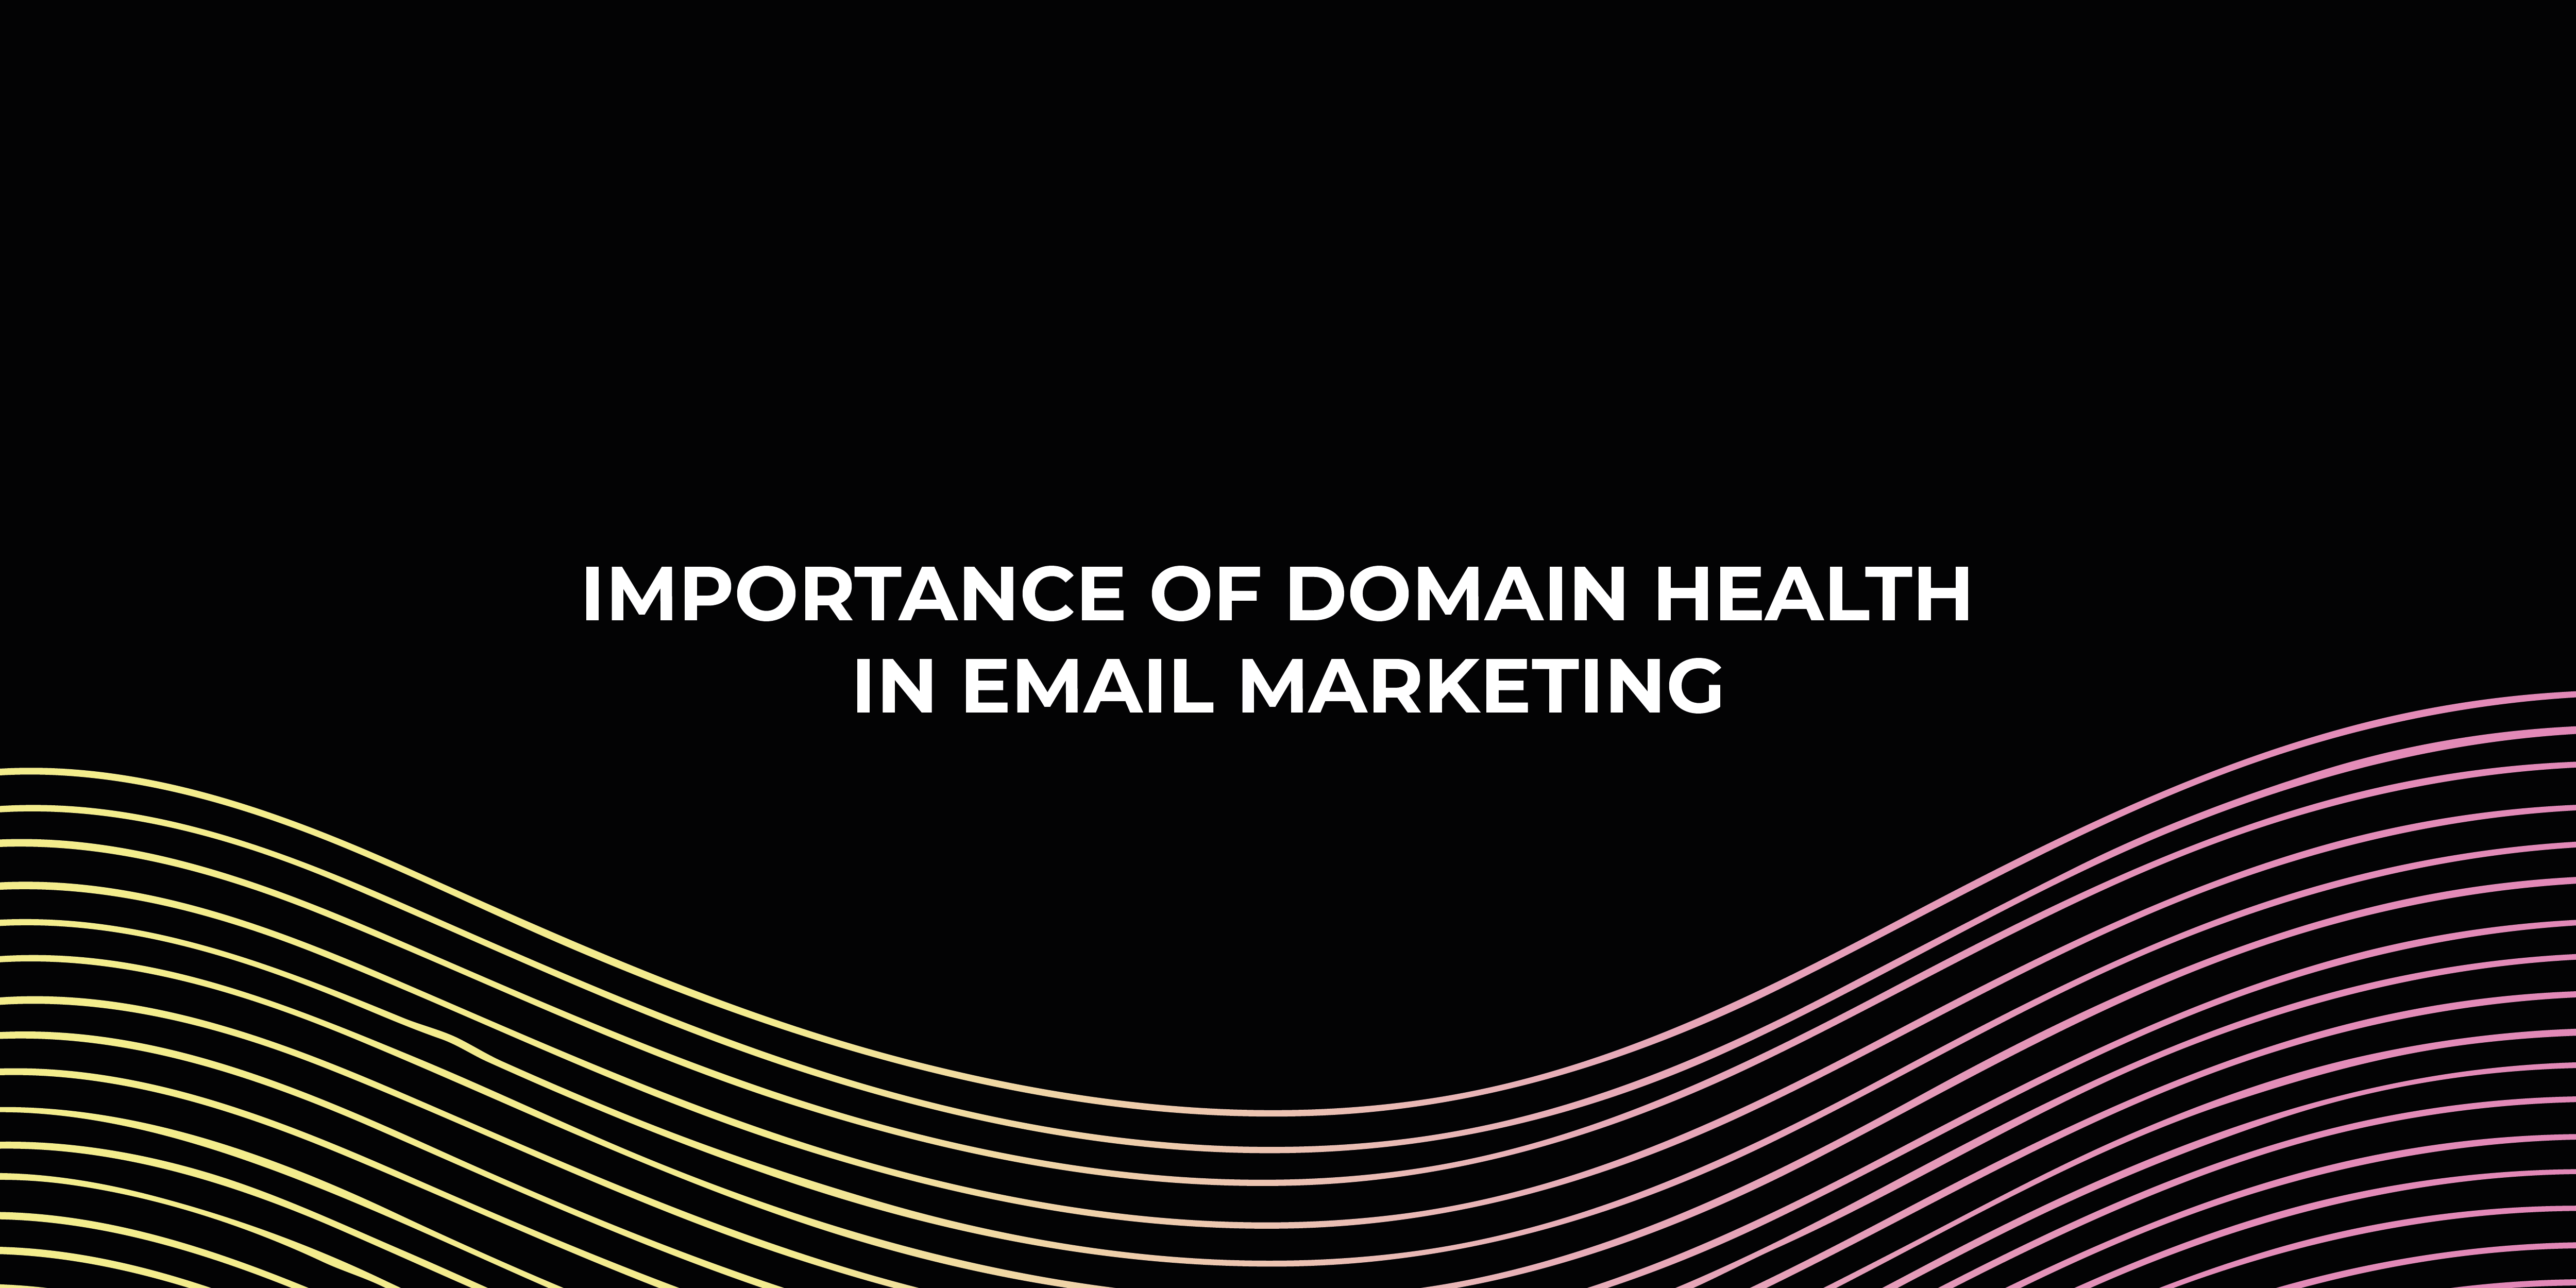 Importance of Domain Health in Email Marketing